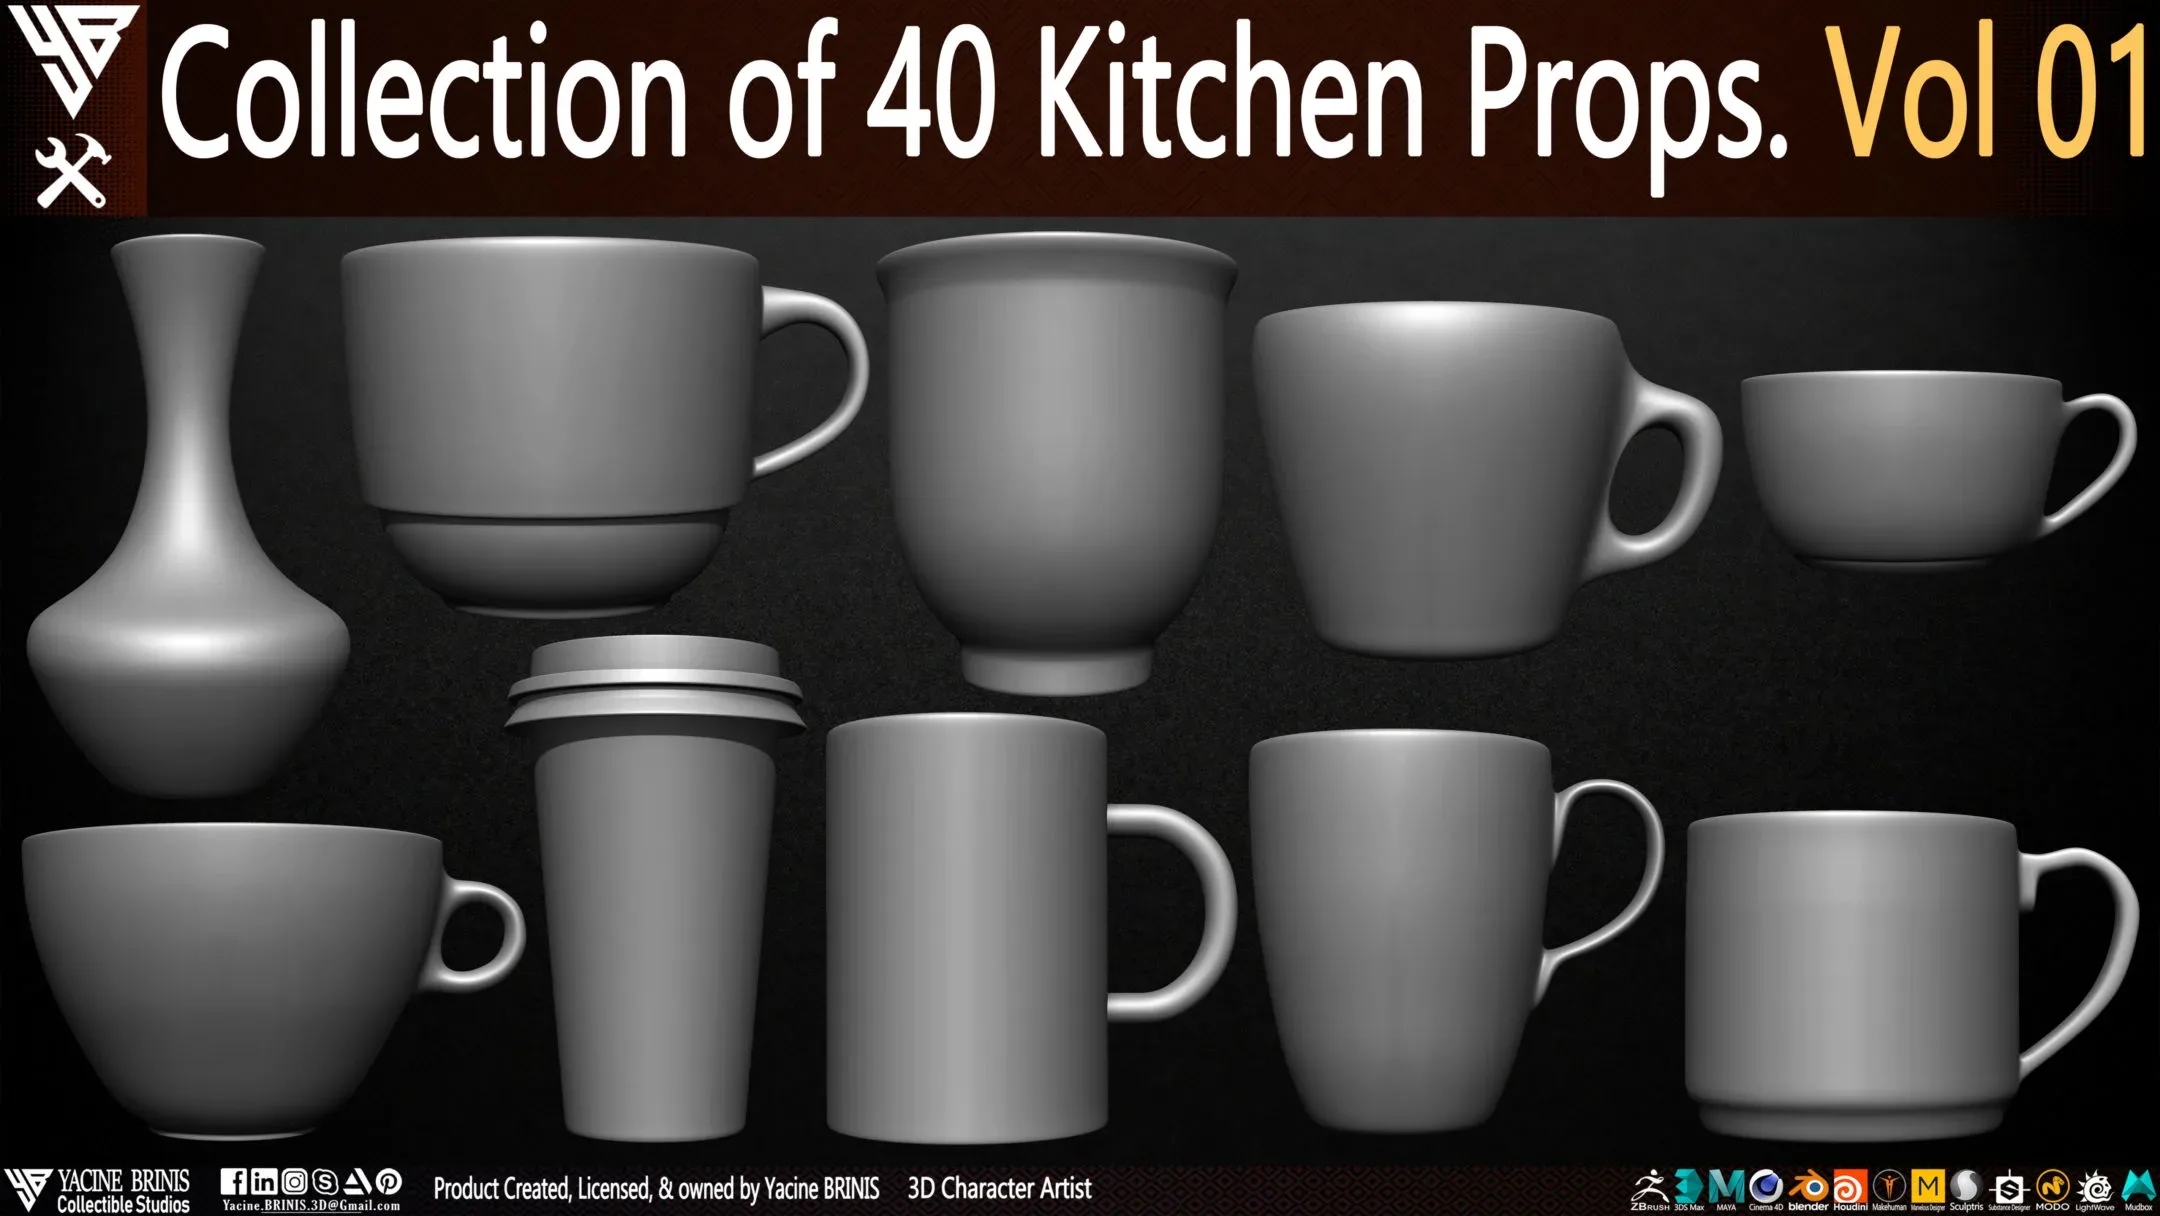 Collection of 40 Kitchen Prop Dishes Vol 01